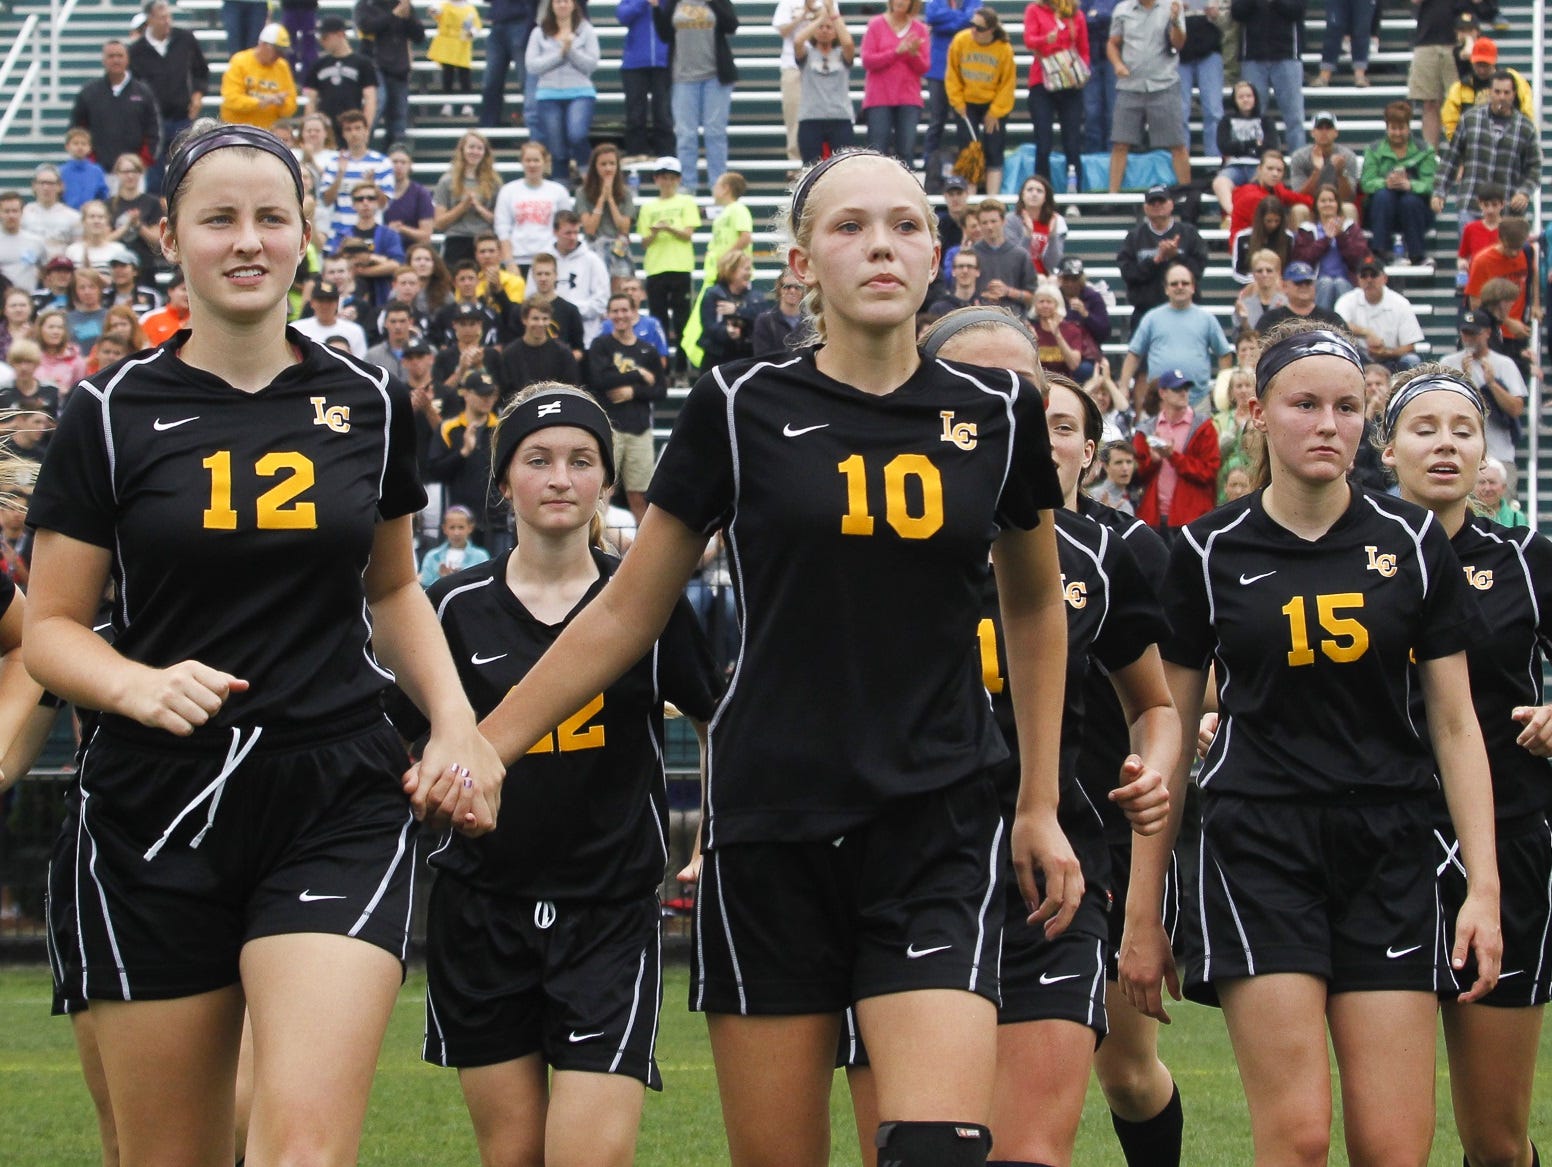 Members of the Lansing Christian soccer team walk off the field after losing to Grandville Calvin 2-1 in the Div. 4 state final last season. The No. 1-ranked Pilgrims are looking to get back to the state tournament on Friday.